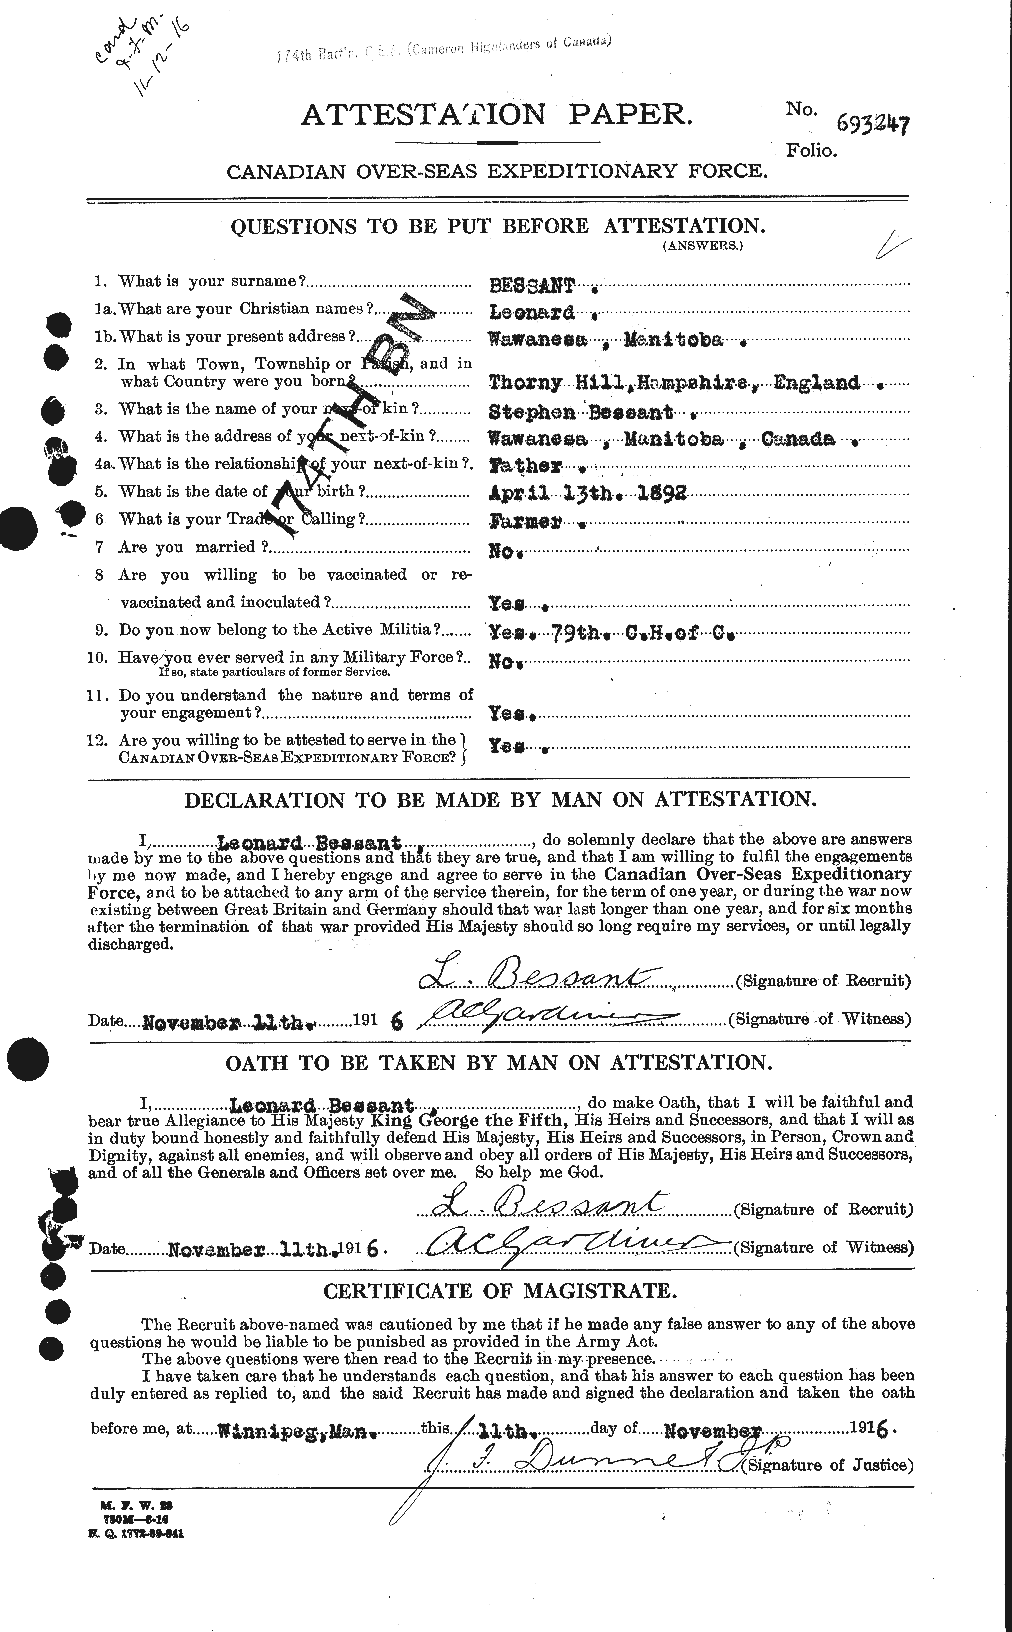 Personnel Records of the First World War - CEF 240137a